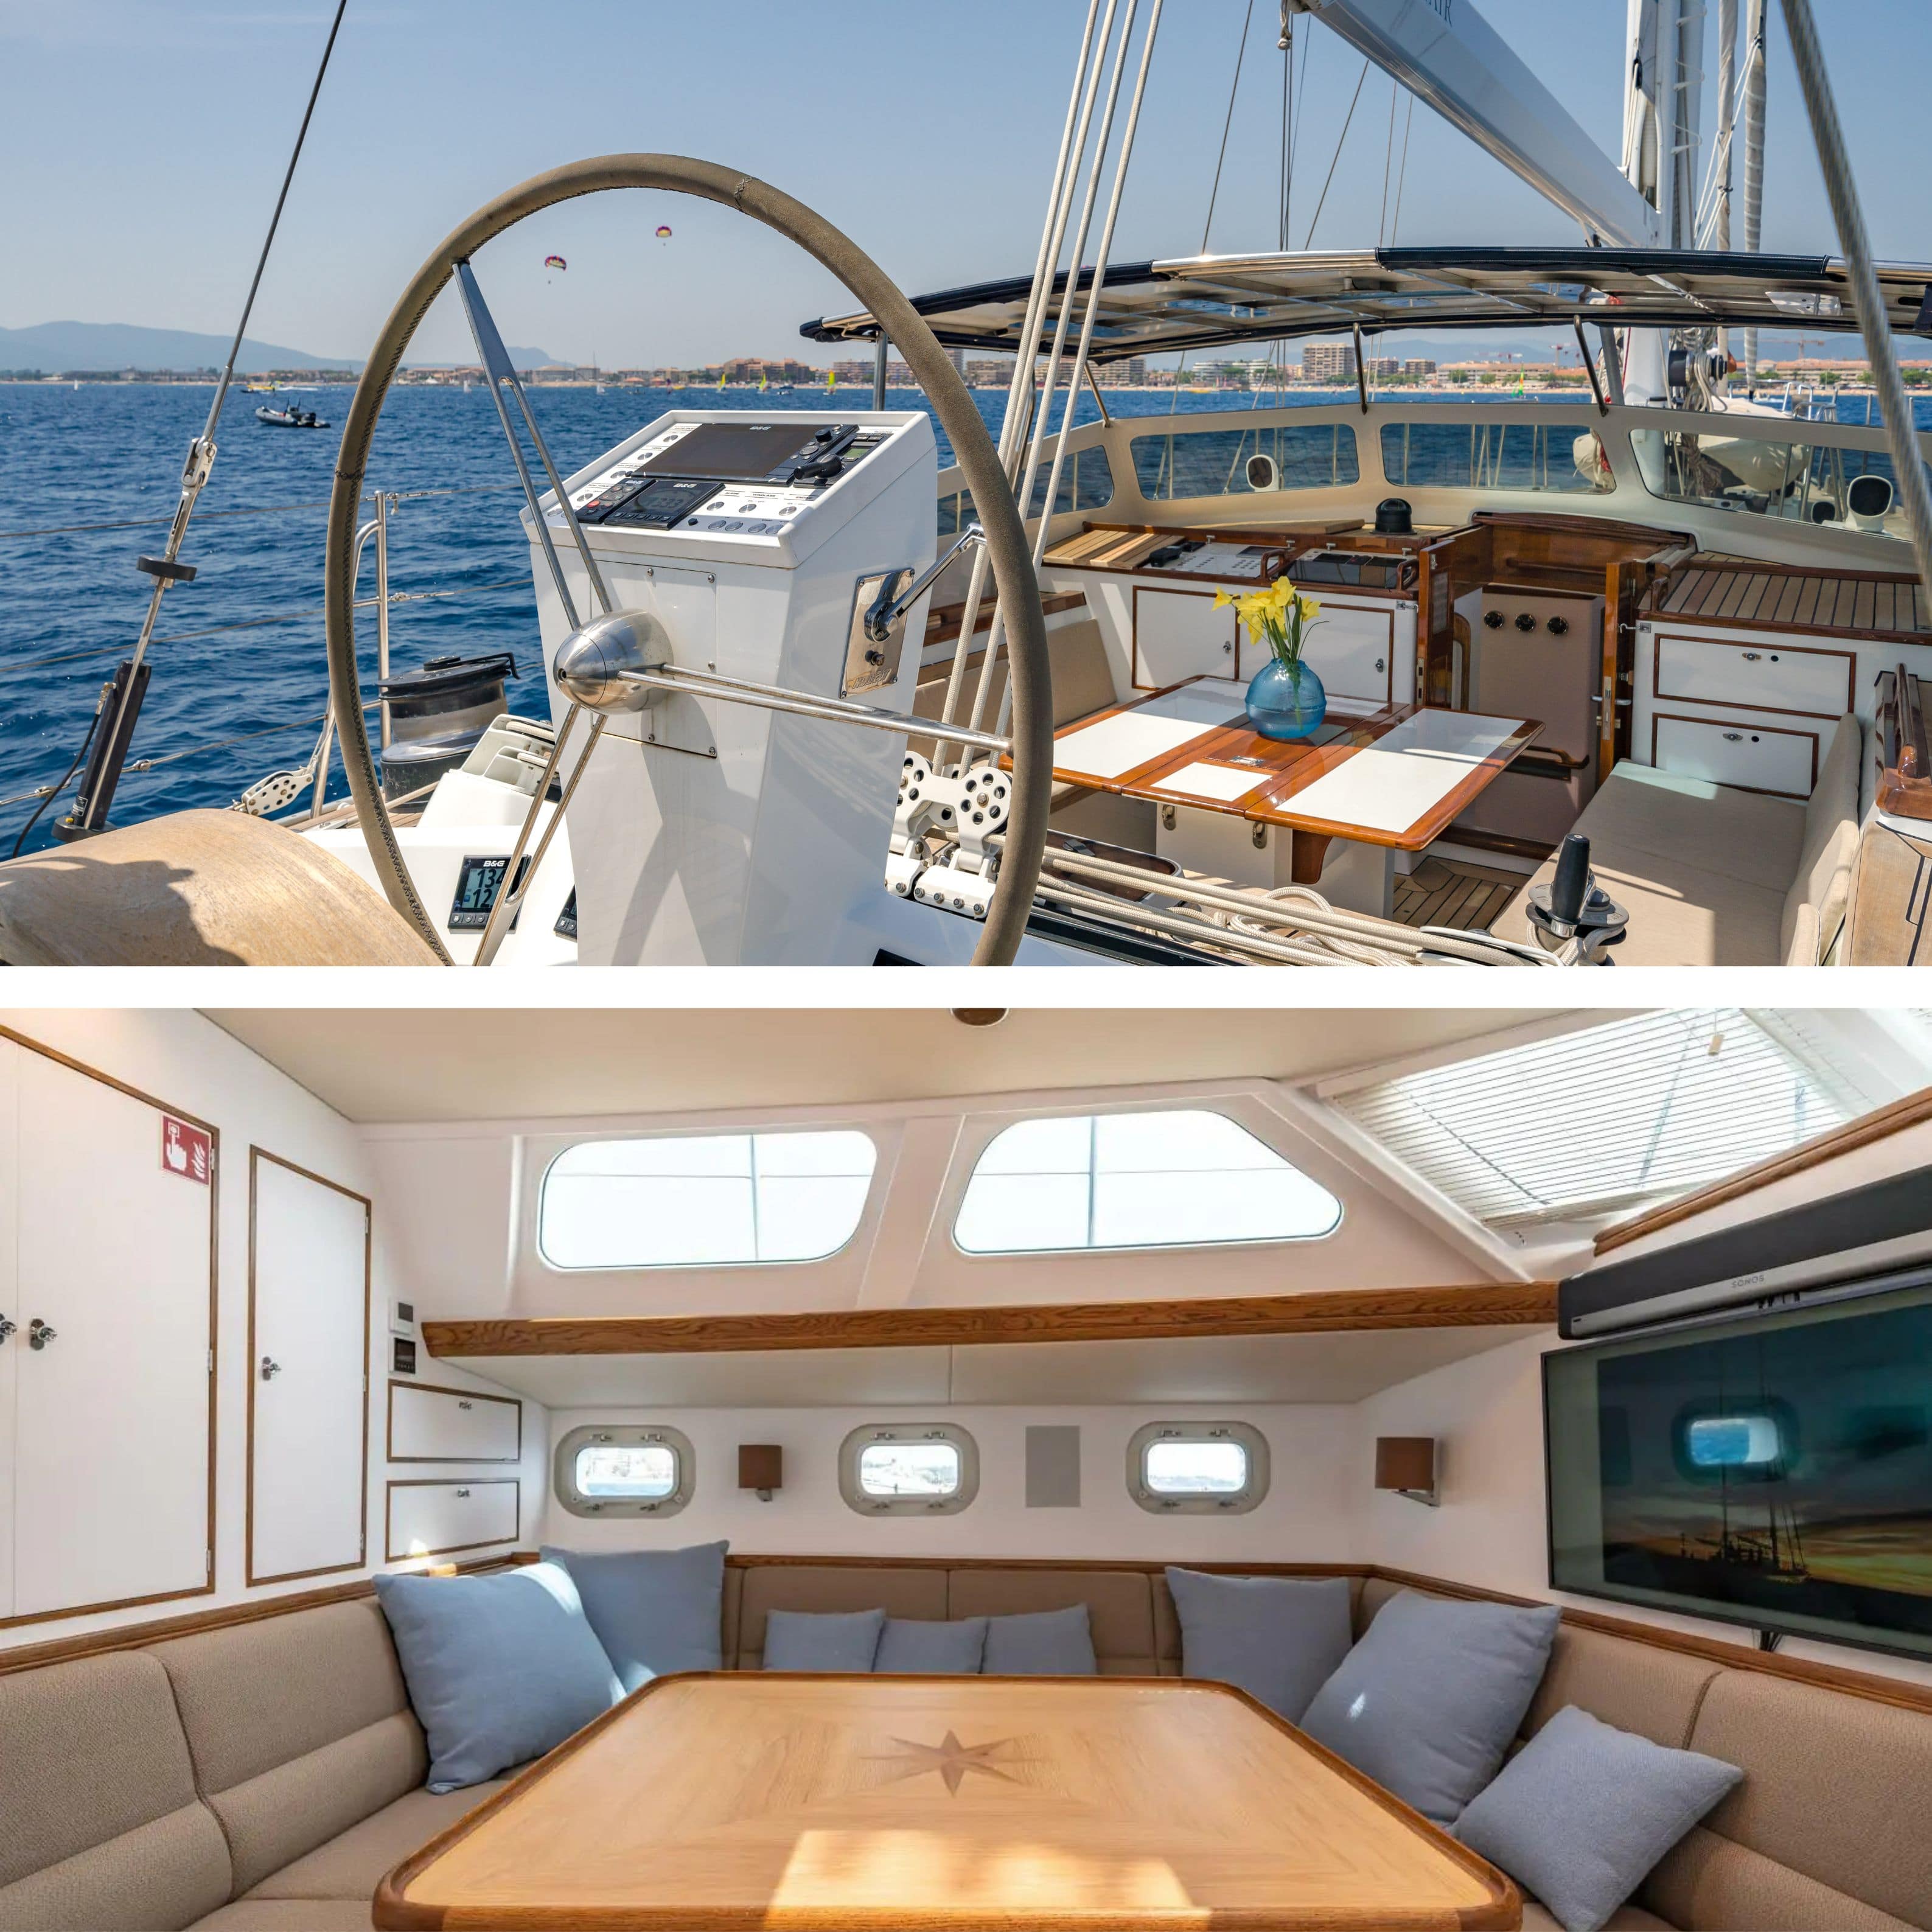 ALTAIR: New sailing yacht for sale!